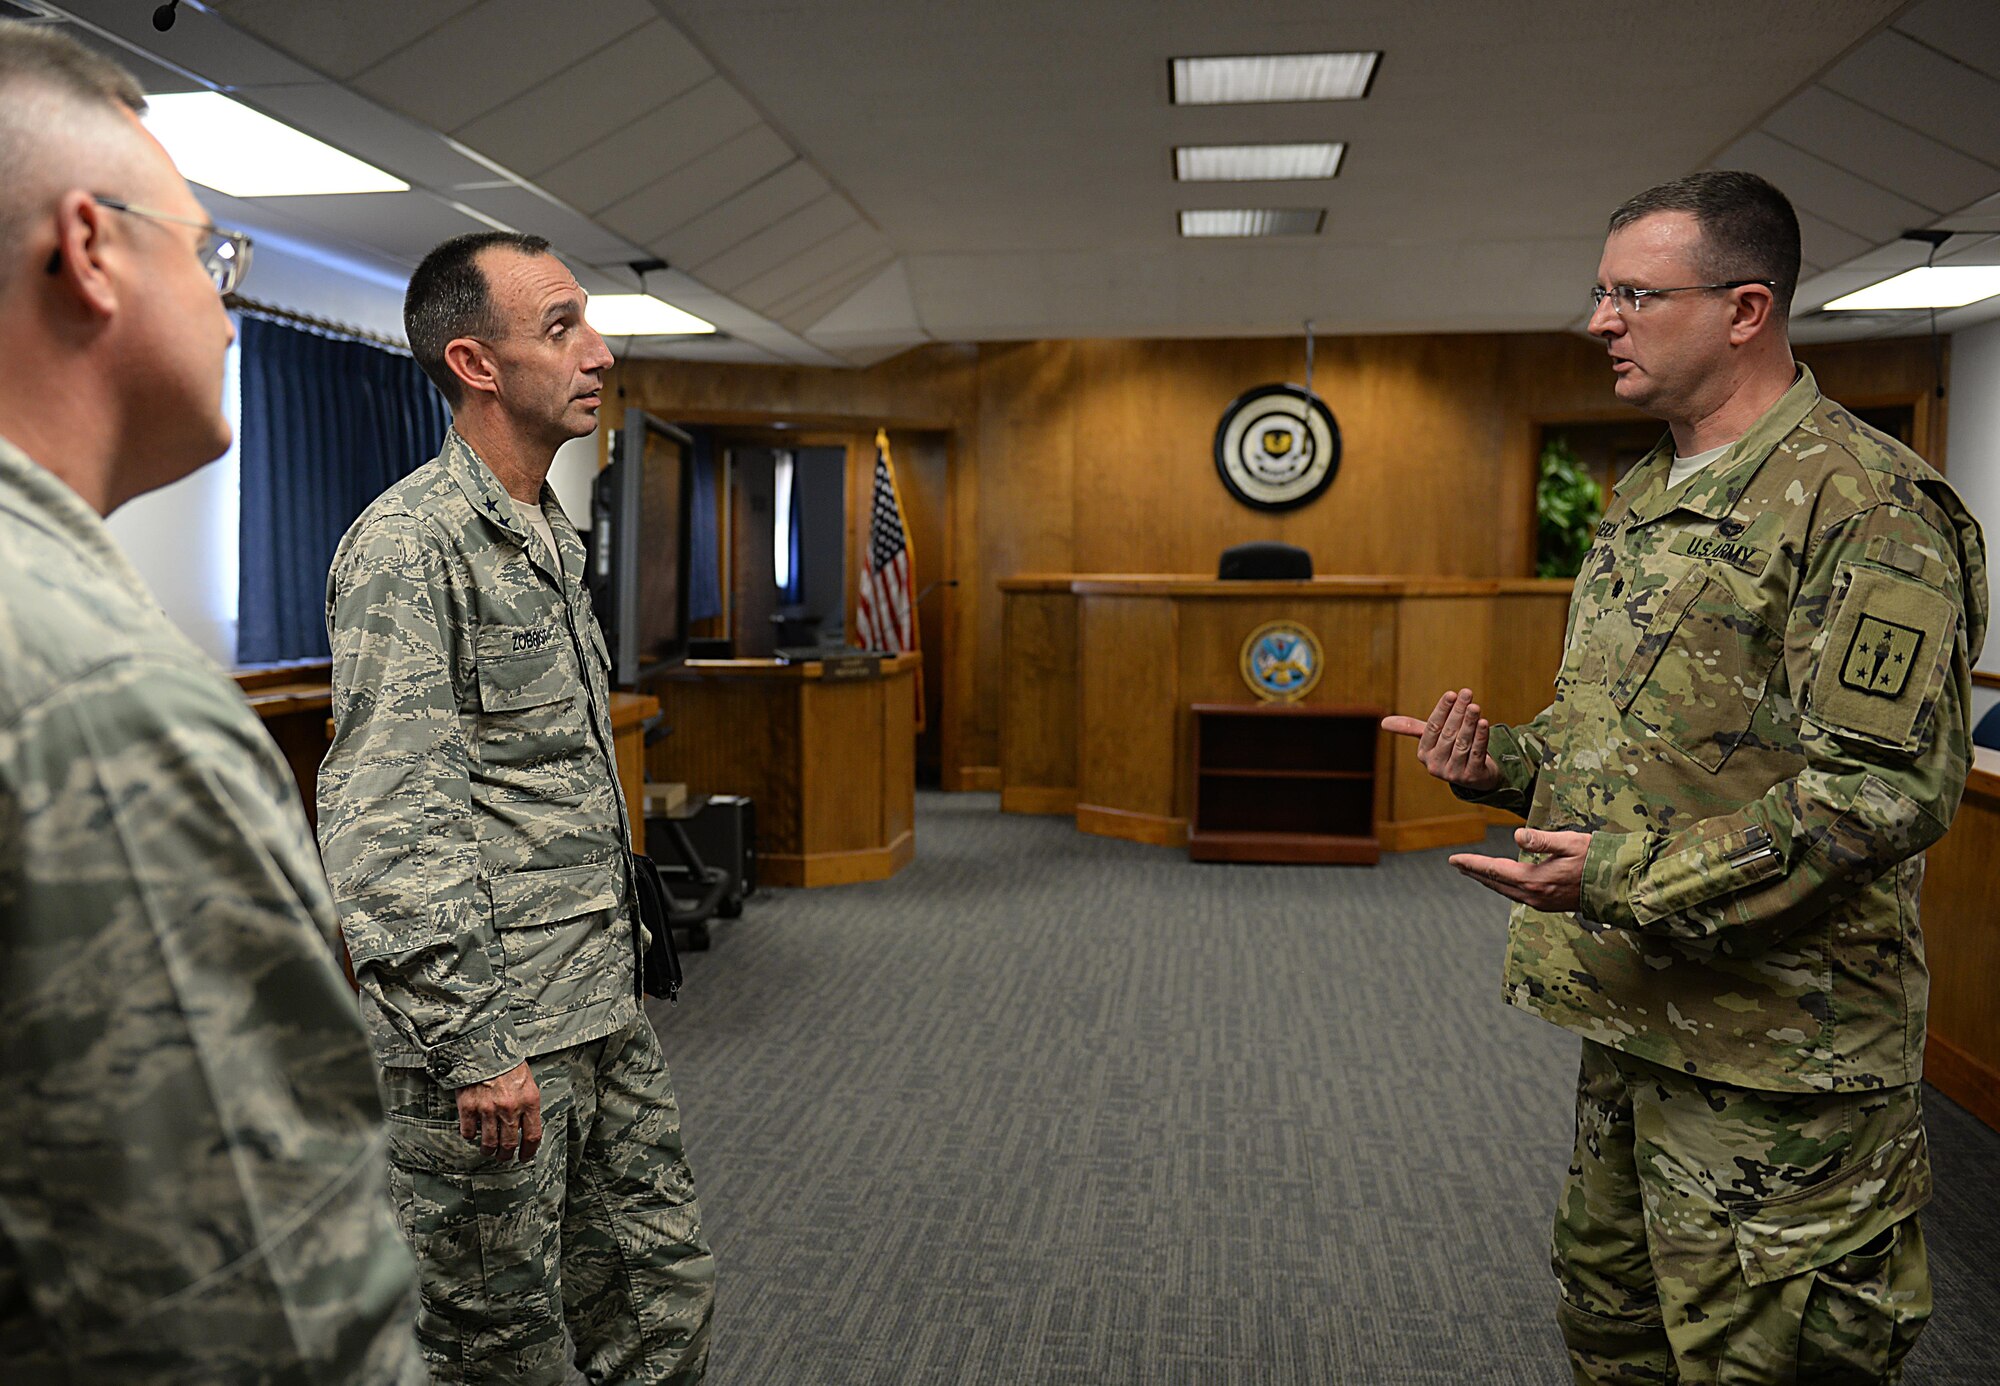 U.S. Air Force Maj. Gen. Scott Zobrist, 9th Air Force commander, asks U.S. Army Lt. Col. Christian Diechert, Command Arms Support Command command judge advocate, questions regarding joint base missions and capabilities in the newly renovated court room at Joint Base Langley-Eustis, Va., Oct. 18, 2016. Zobrist toured facilities on JBLE to gain knowledge on JBLE’s missions, goals, needs and obstacles. (U.S. Air Force photo by Staff Sgt. Teresa J. Cleveland) 